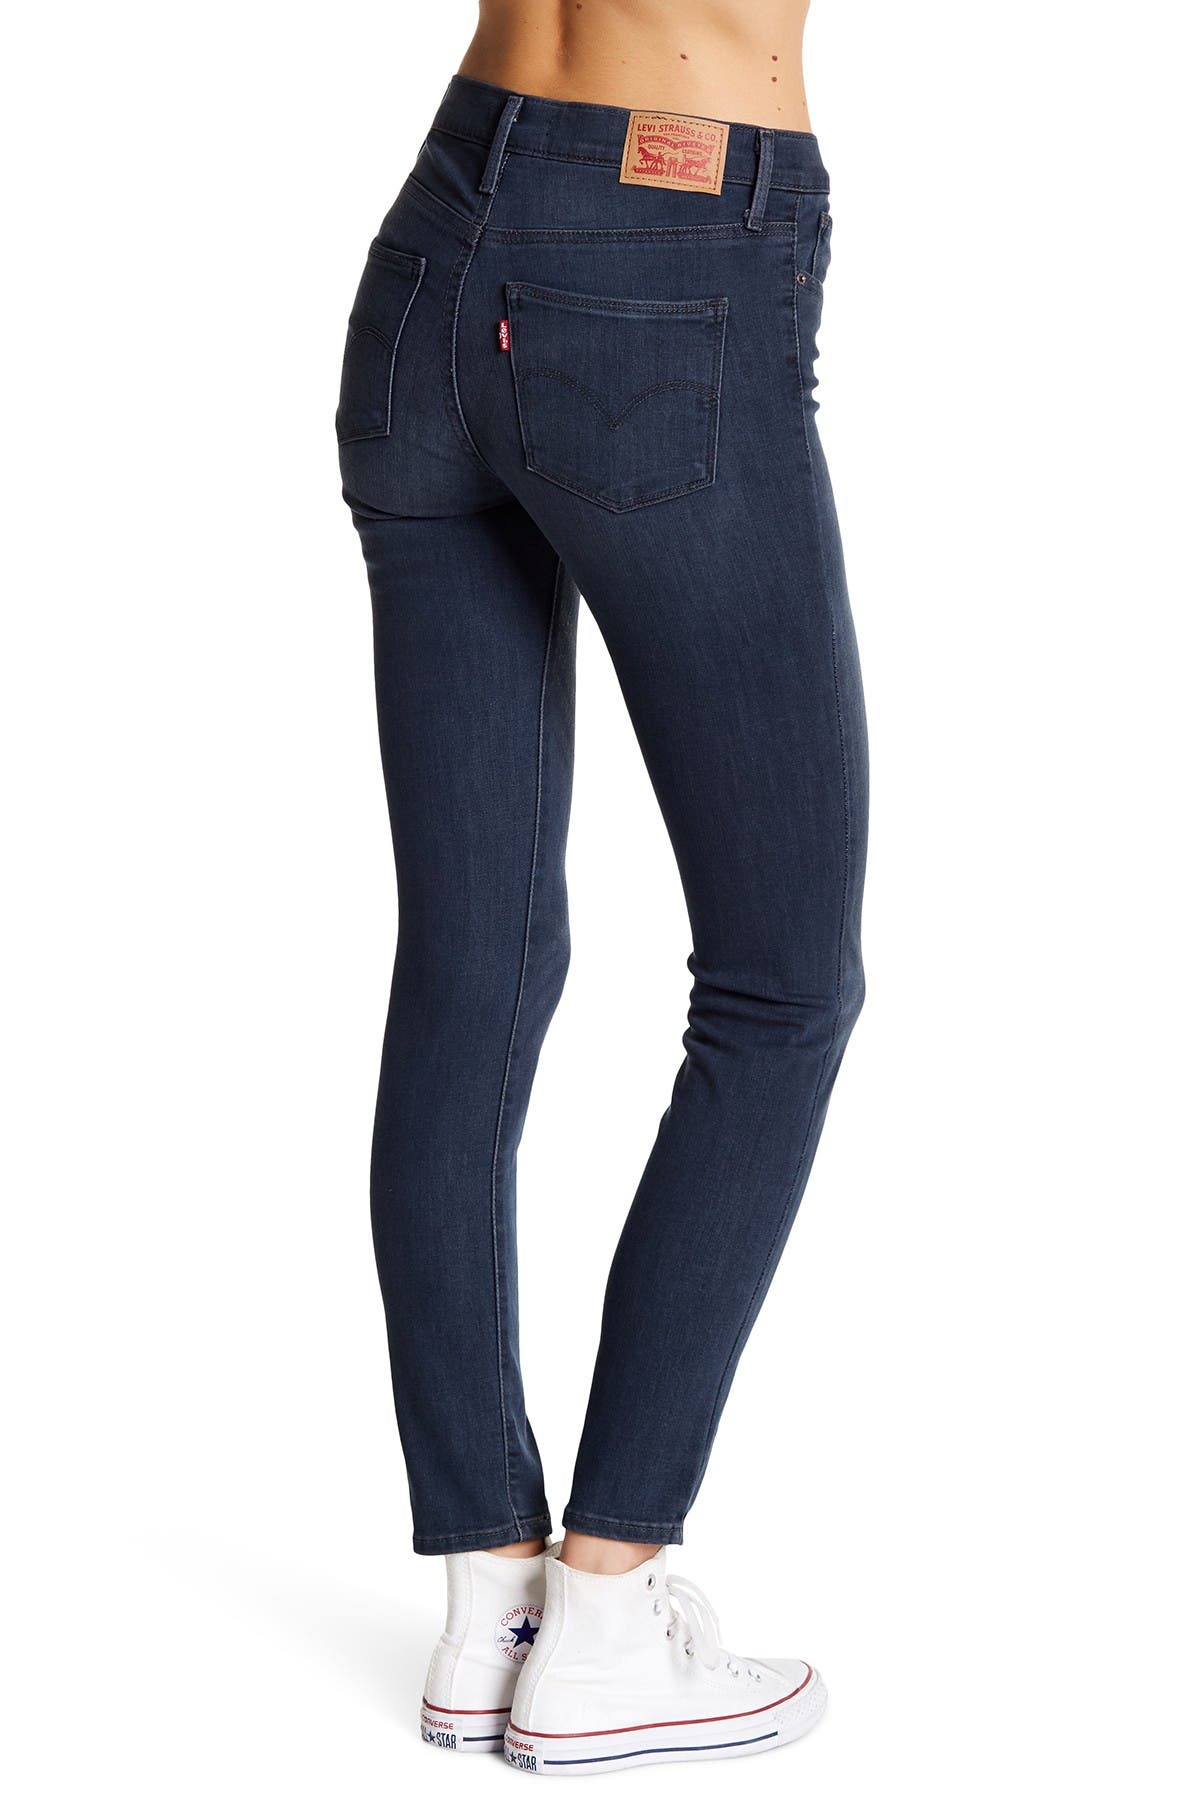 levi's slimming skinny jeans high waisted